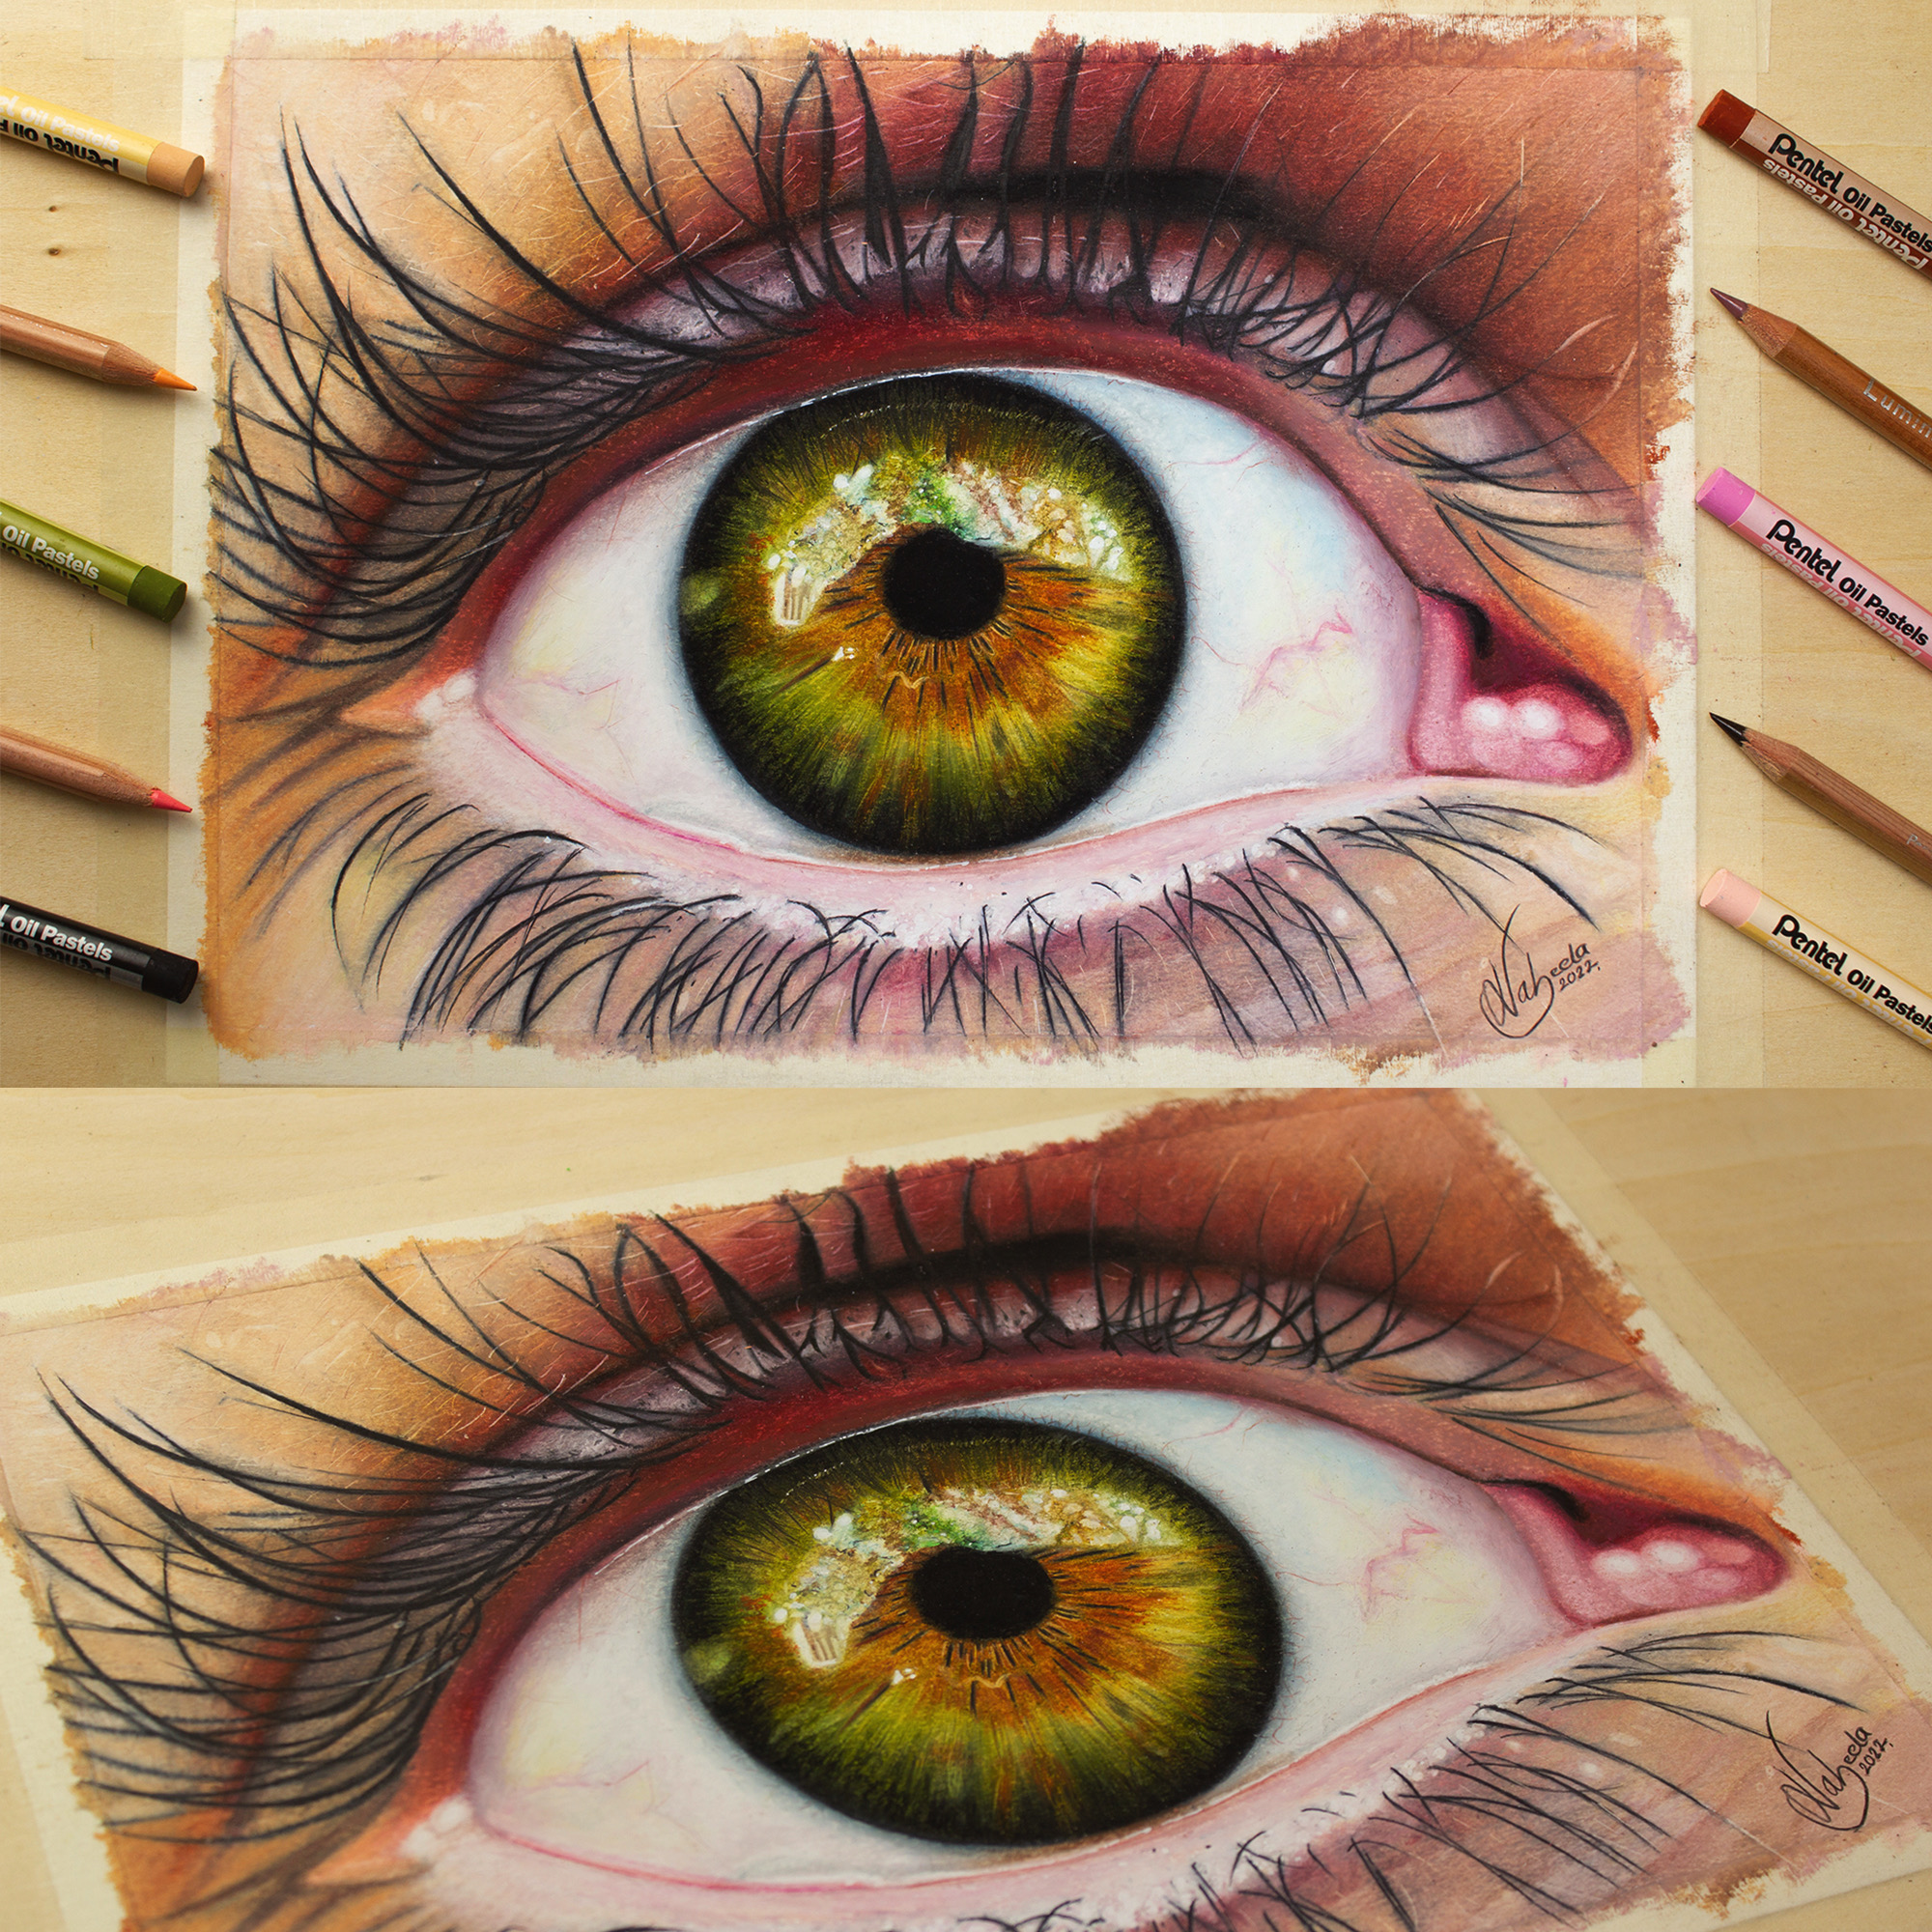 Oil Pastel Colored Pencil Drawing - Eye by NabeelaTheArtist on